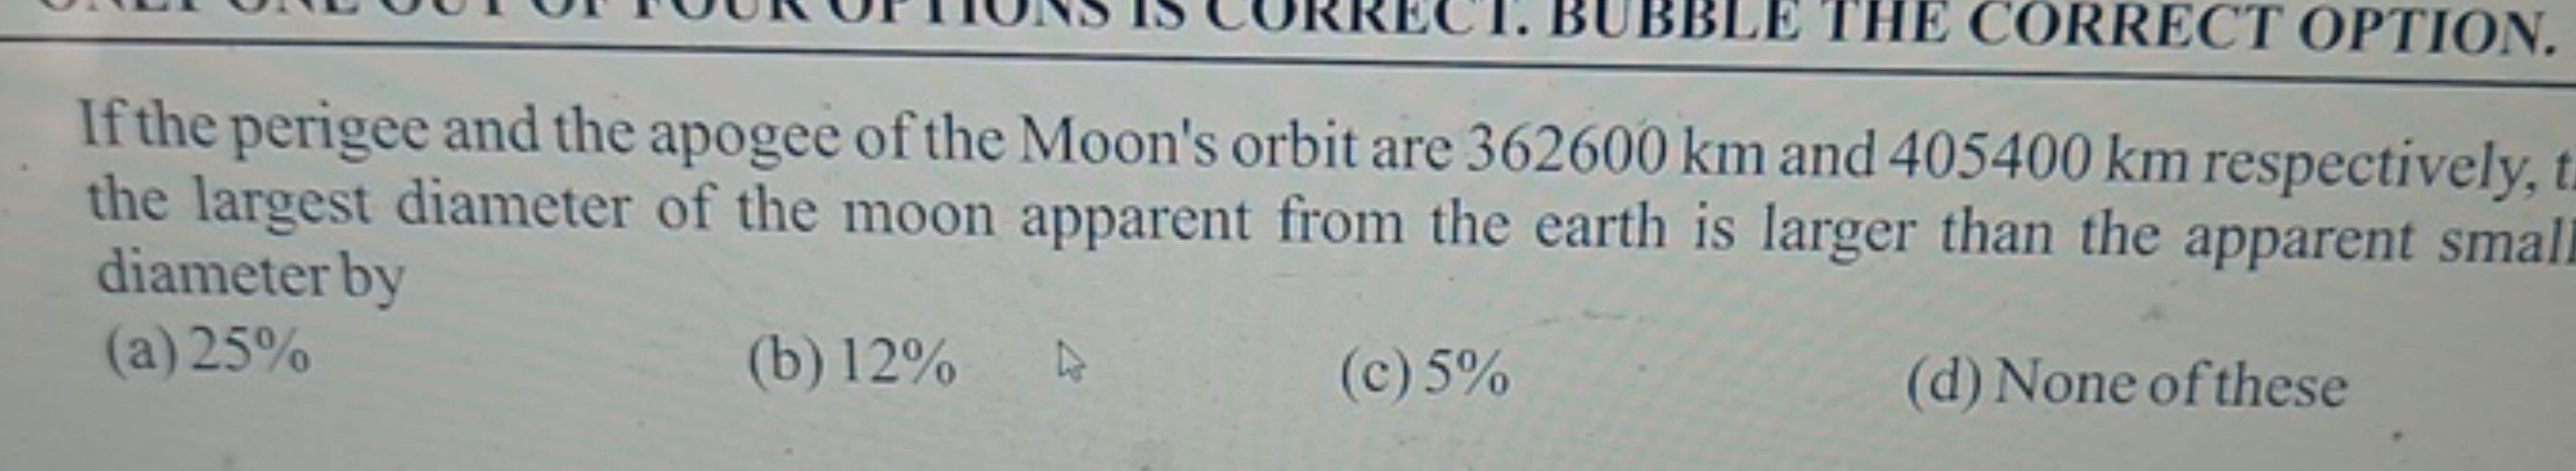 If the perigee and the apogee of the Moon's orbit are 362600 km and 40